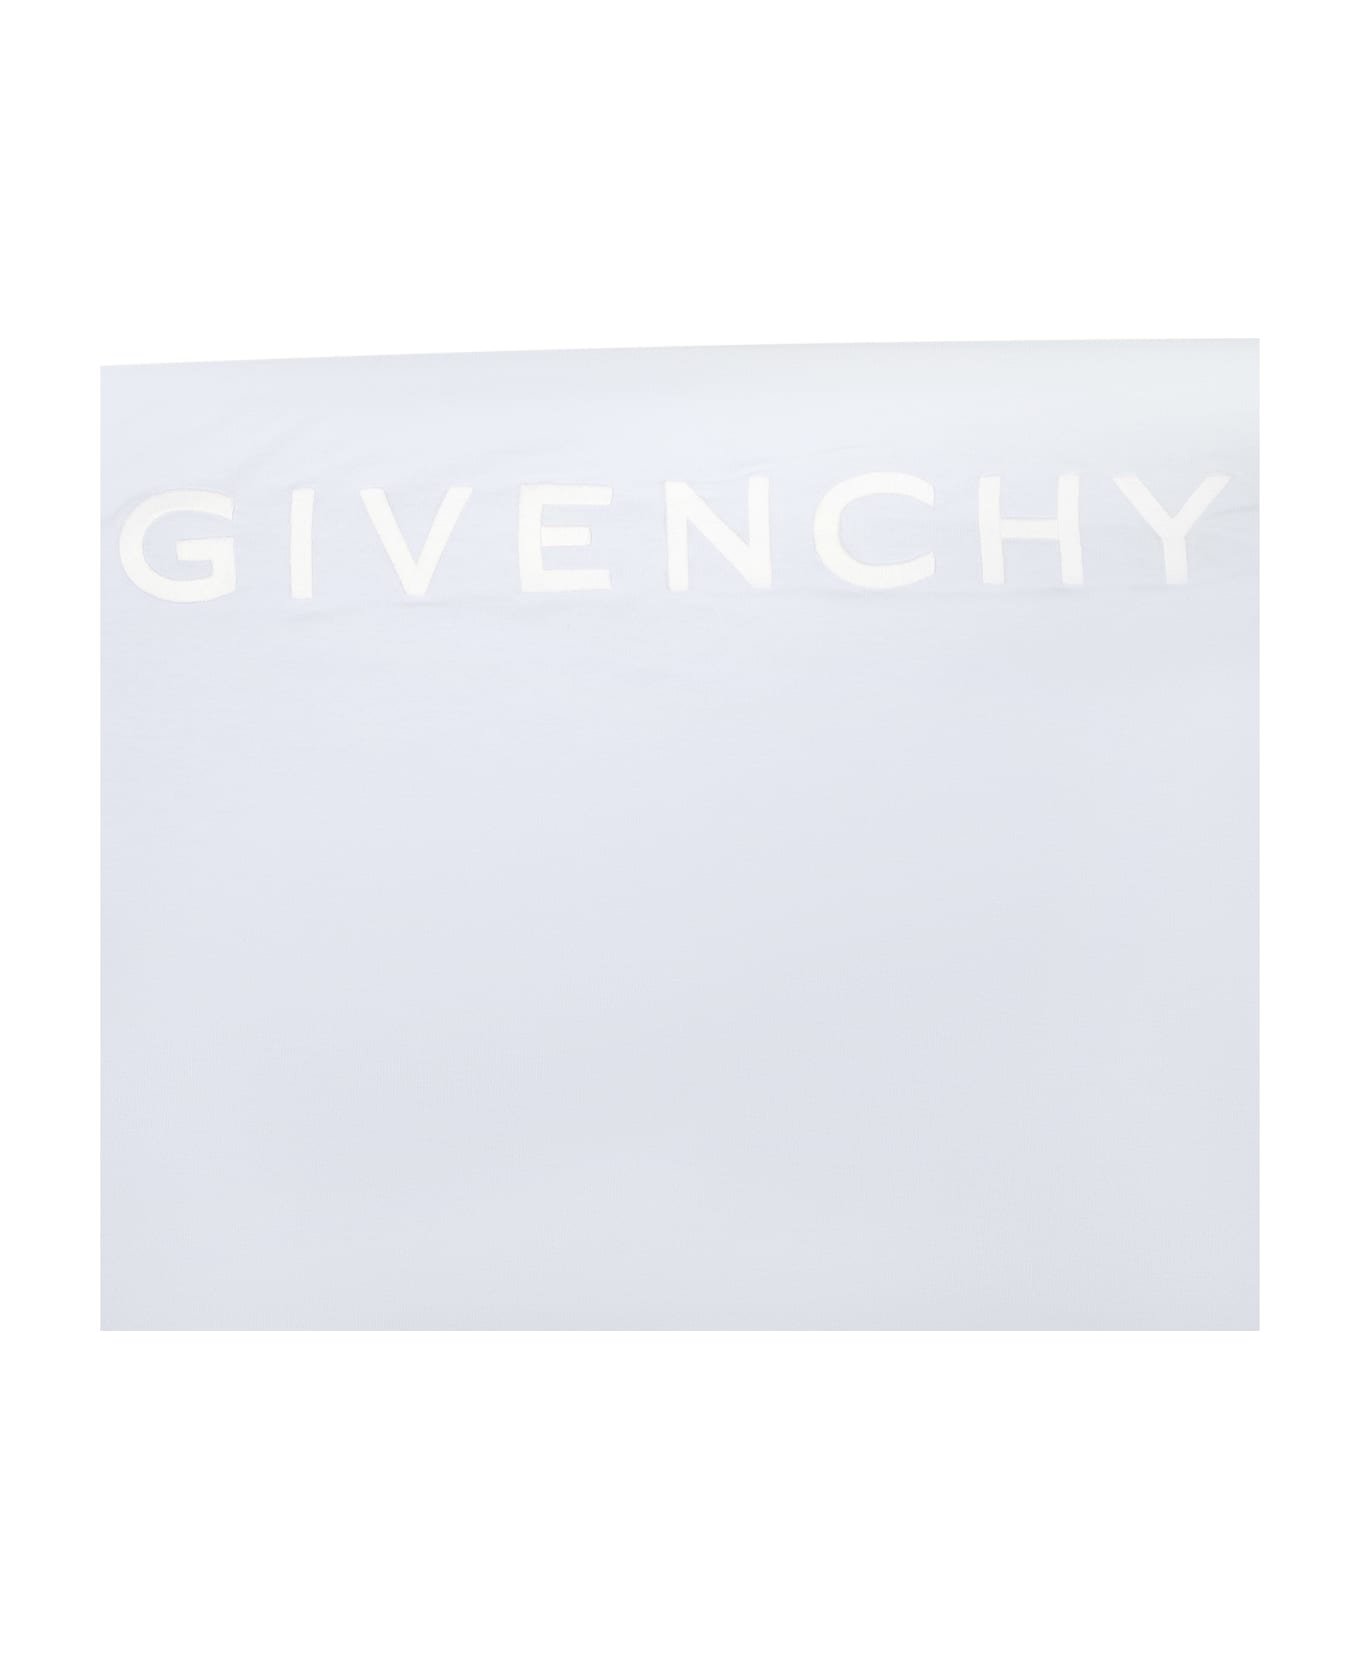 Givenchy Light Blue Blanket For Baby Boy With Logo - Light Blue アクセサリー＆ギフト